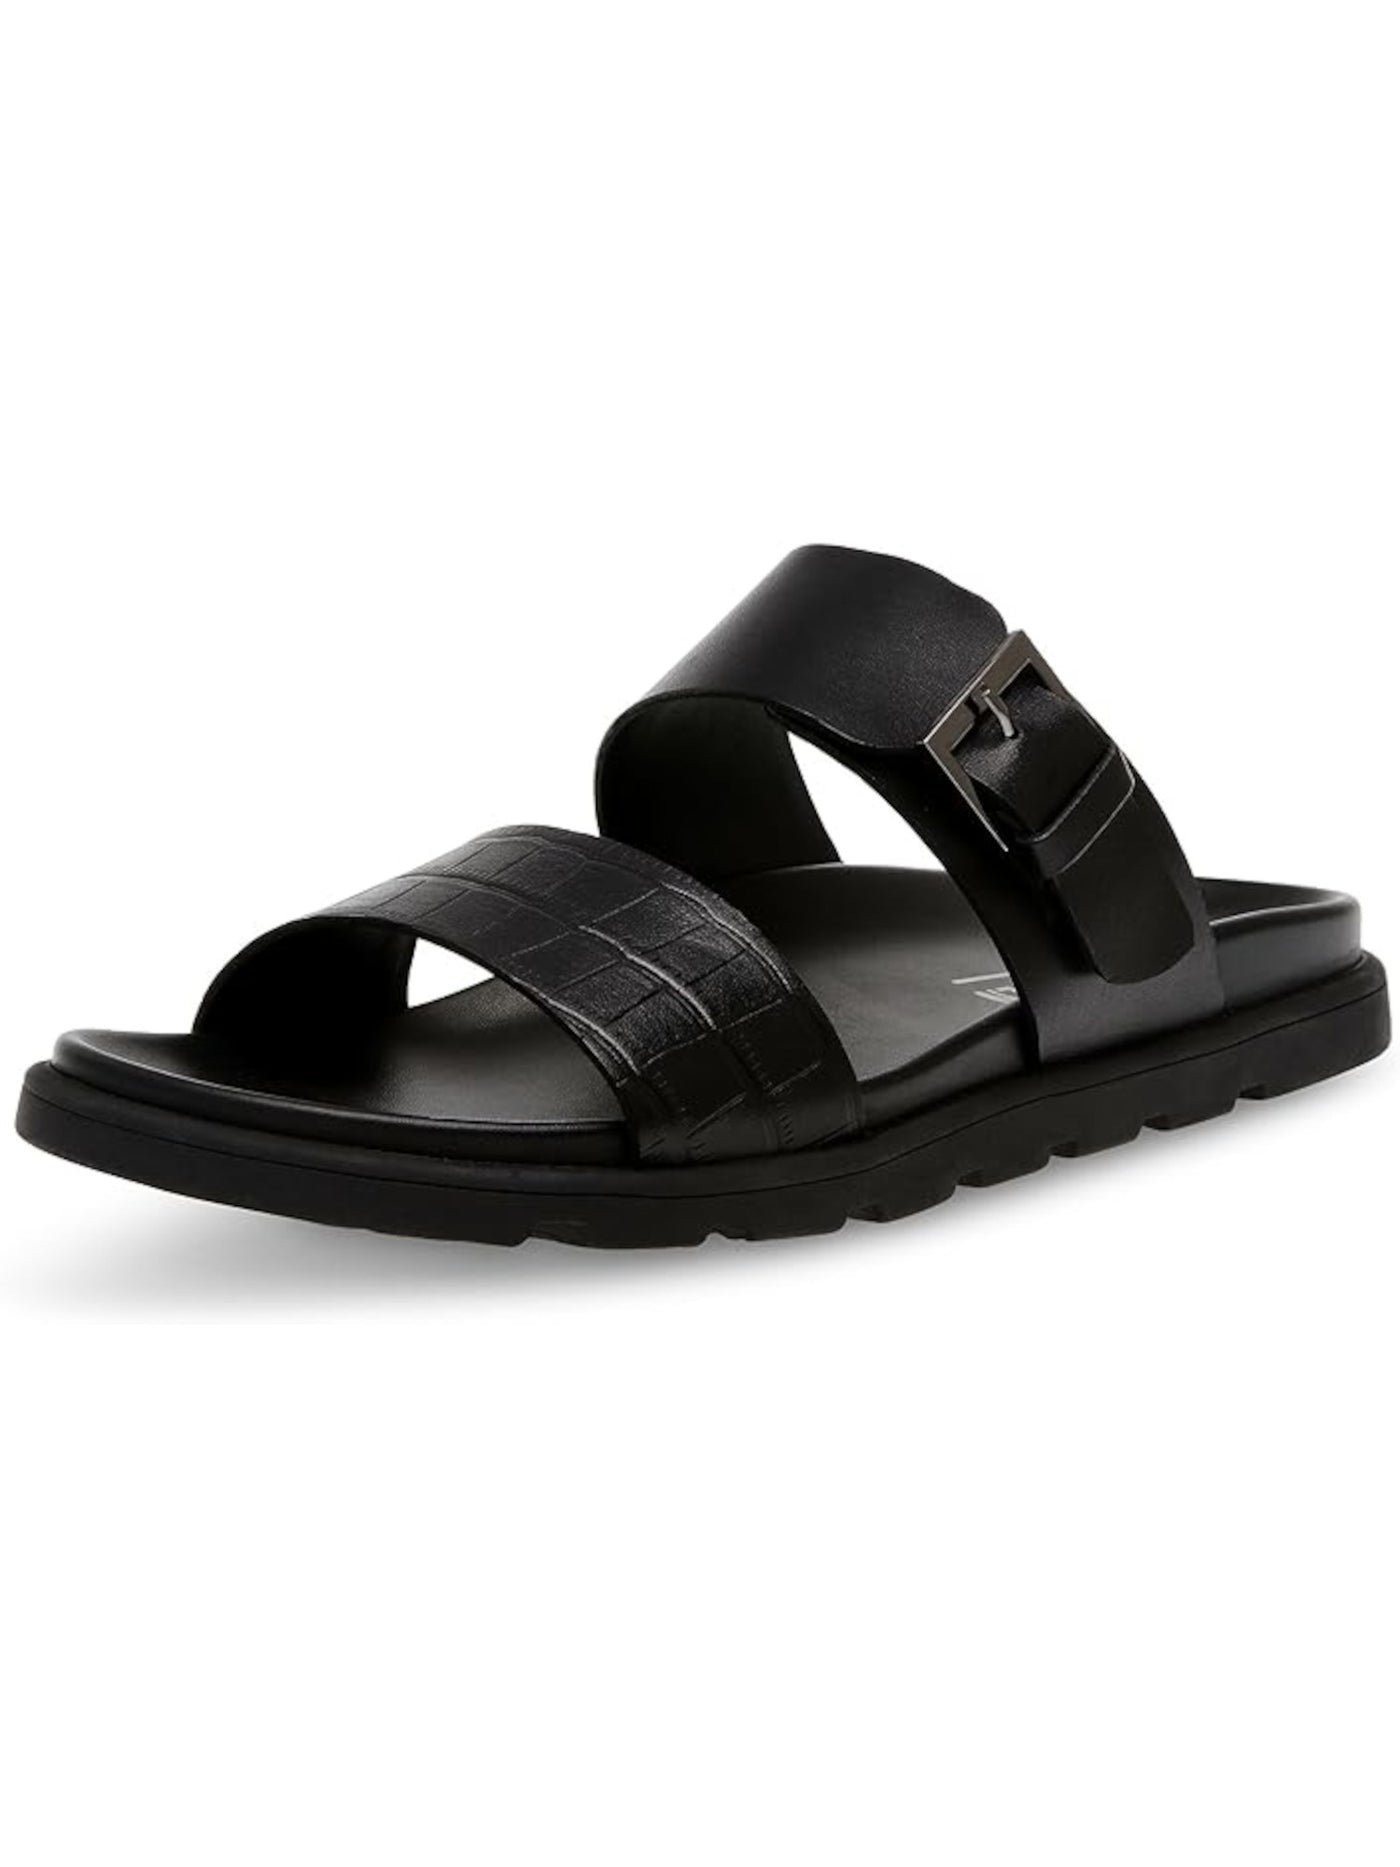 STEVE MADDEN Mens Black Embossed Front Strap Corro Round Toe Buckle Leather Sandals Shoes 9.5 M